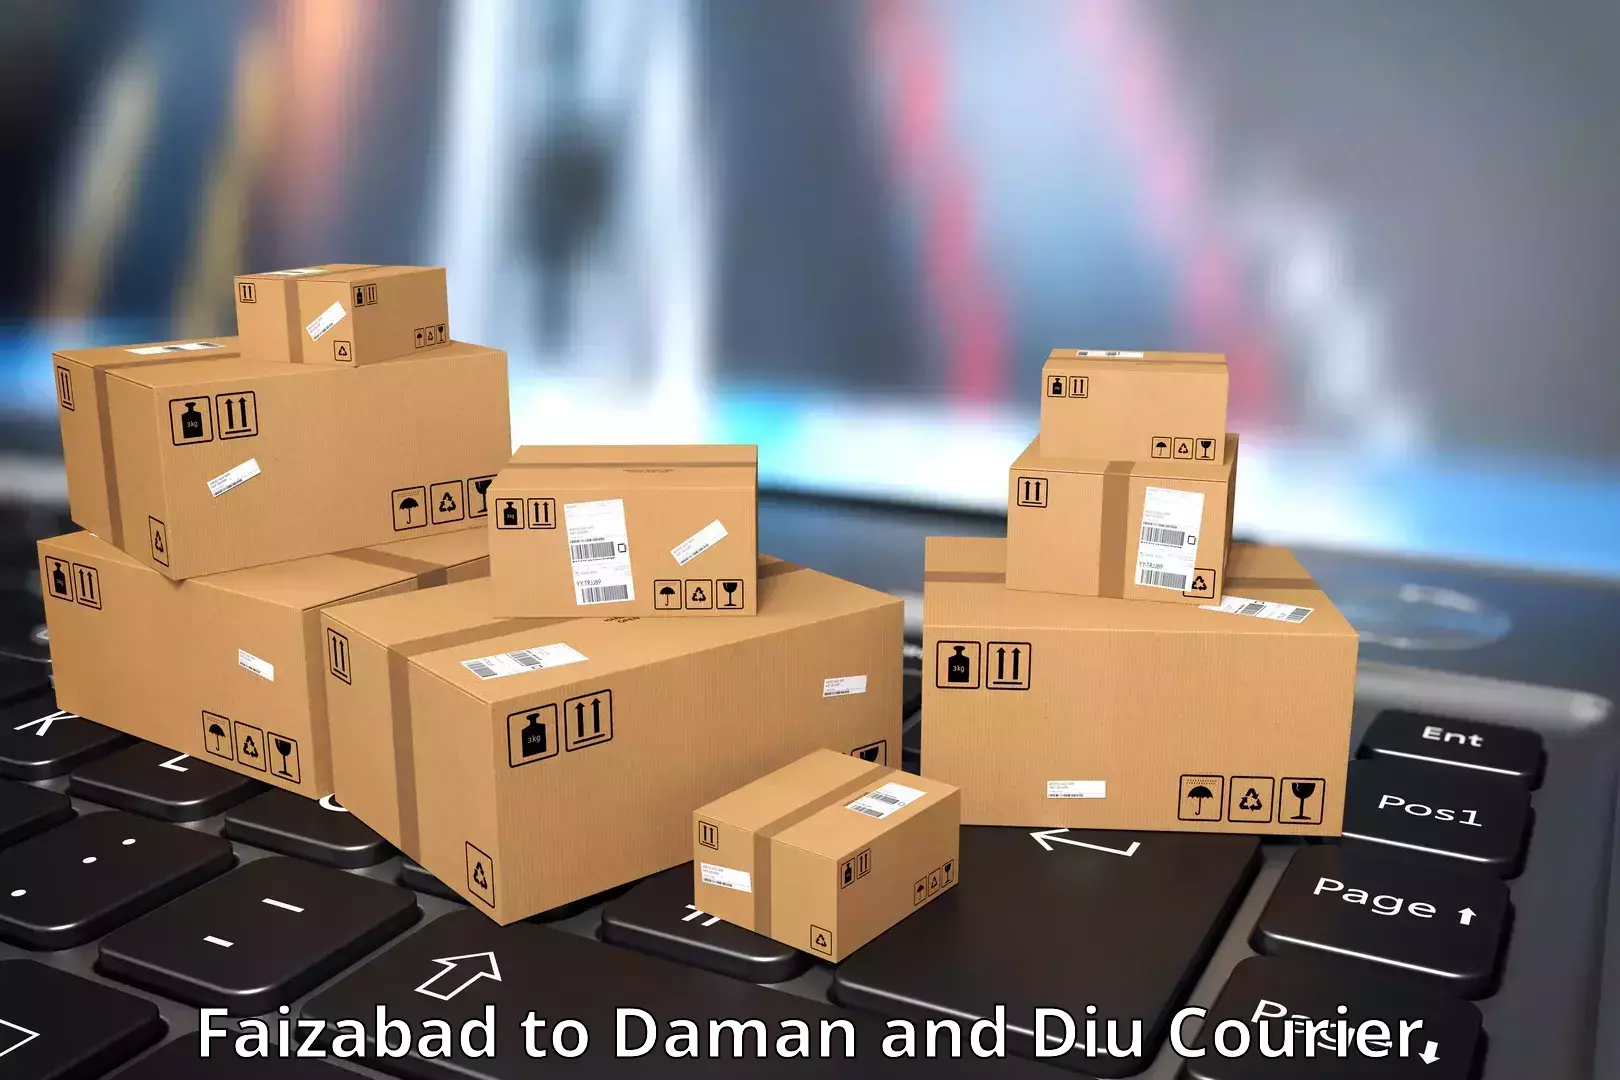 Subscription-based courier Faizabad to Diu